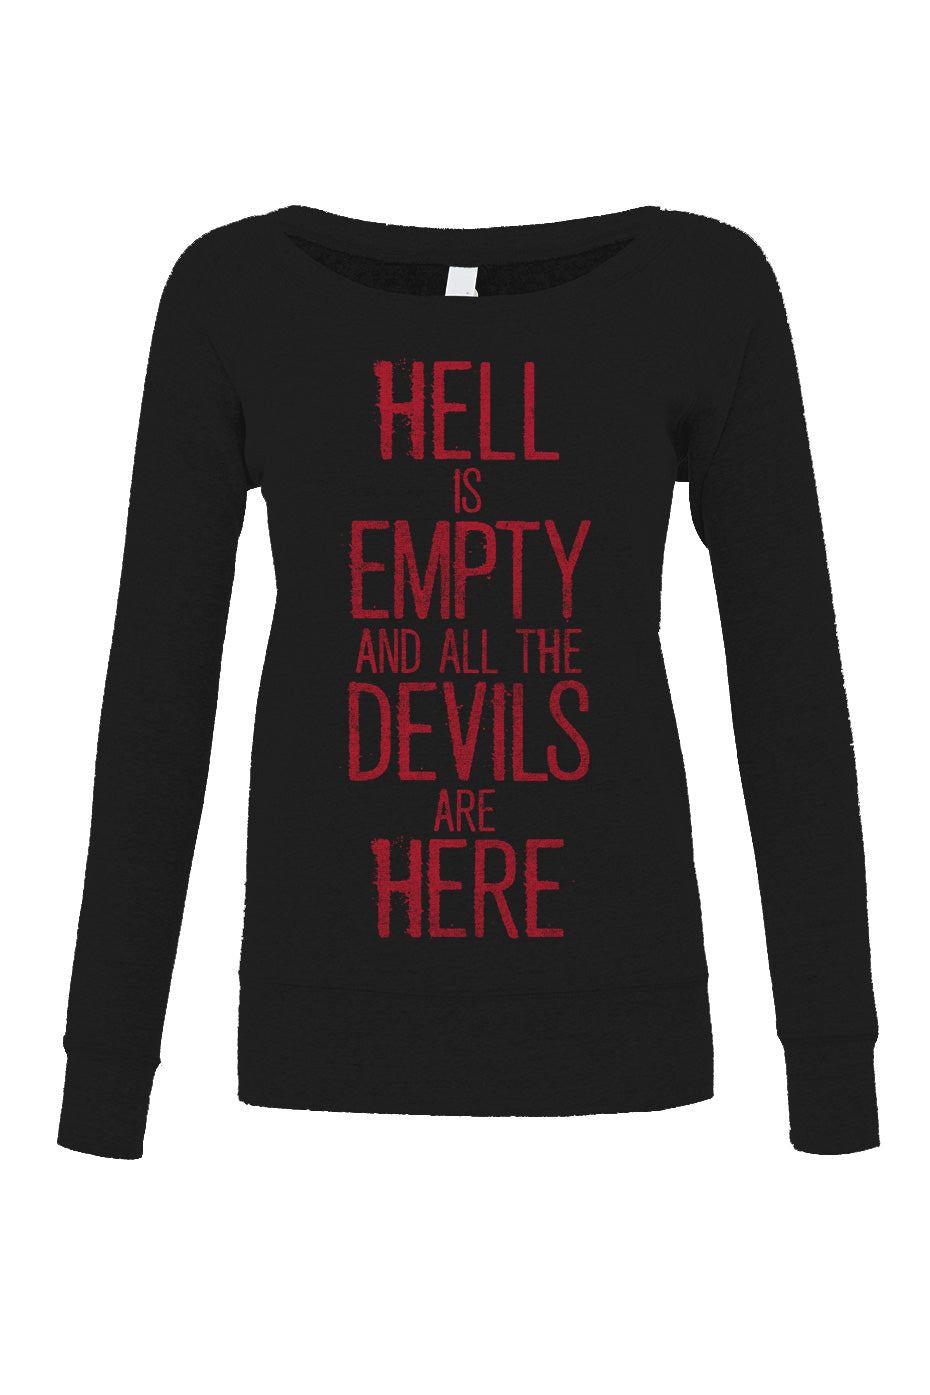 Women's Hell is Empty and All the Devils are Here Shakespeare Scoop Neck Fleece